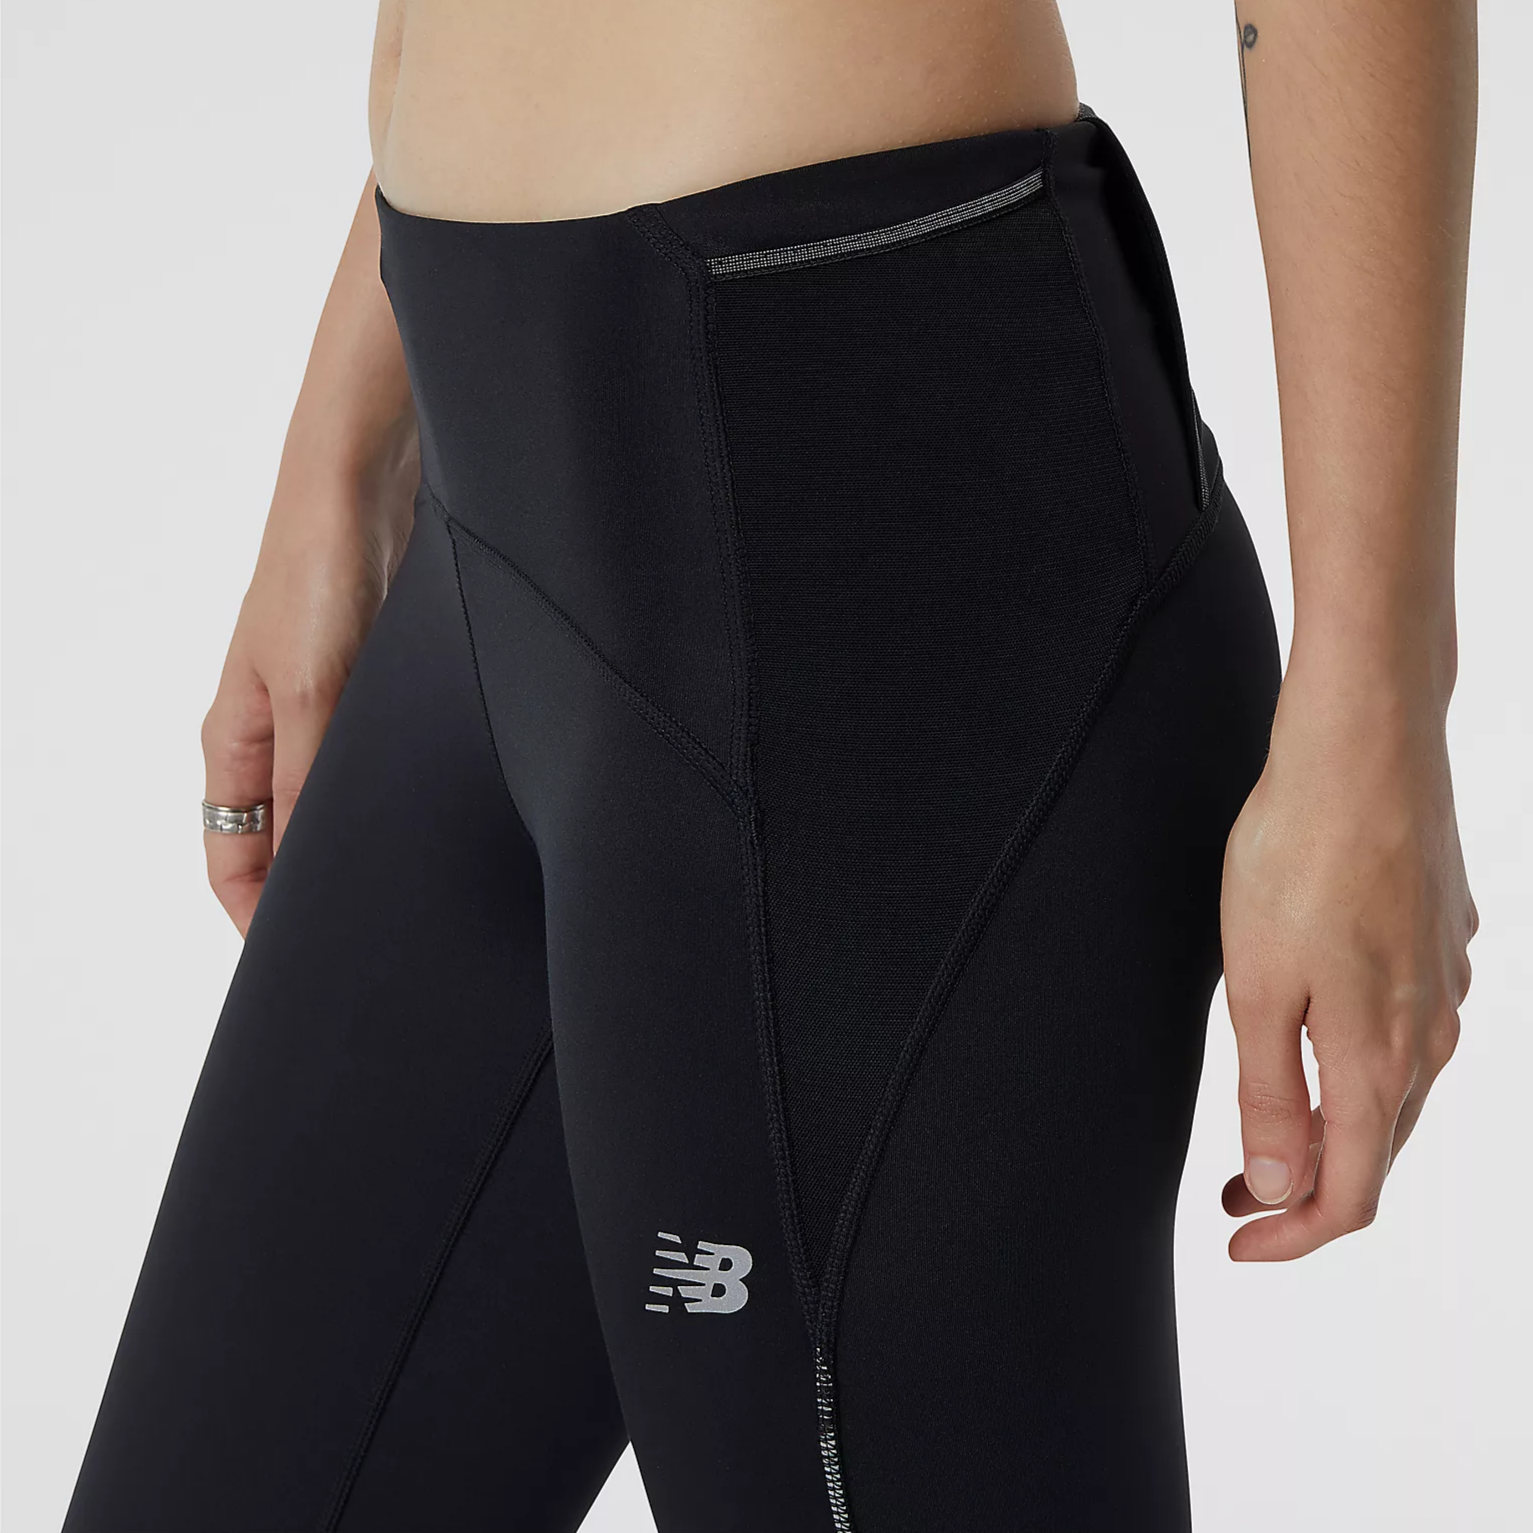 New Balance Leggings, Tights, Joggers and Pants on Sale - Joe's New Balance  Outlet